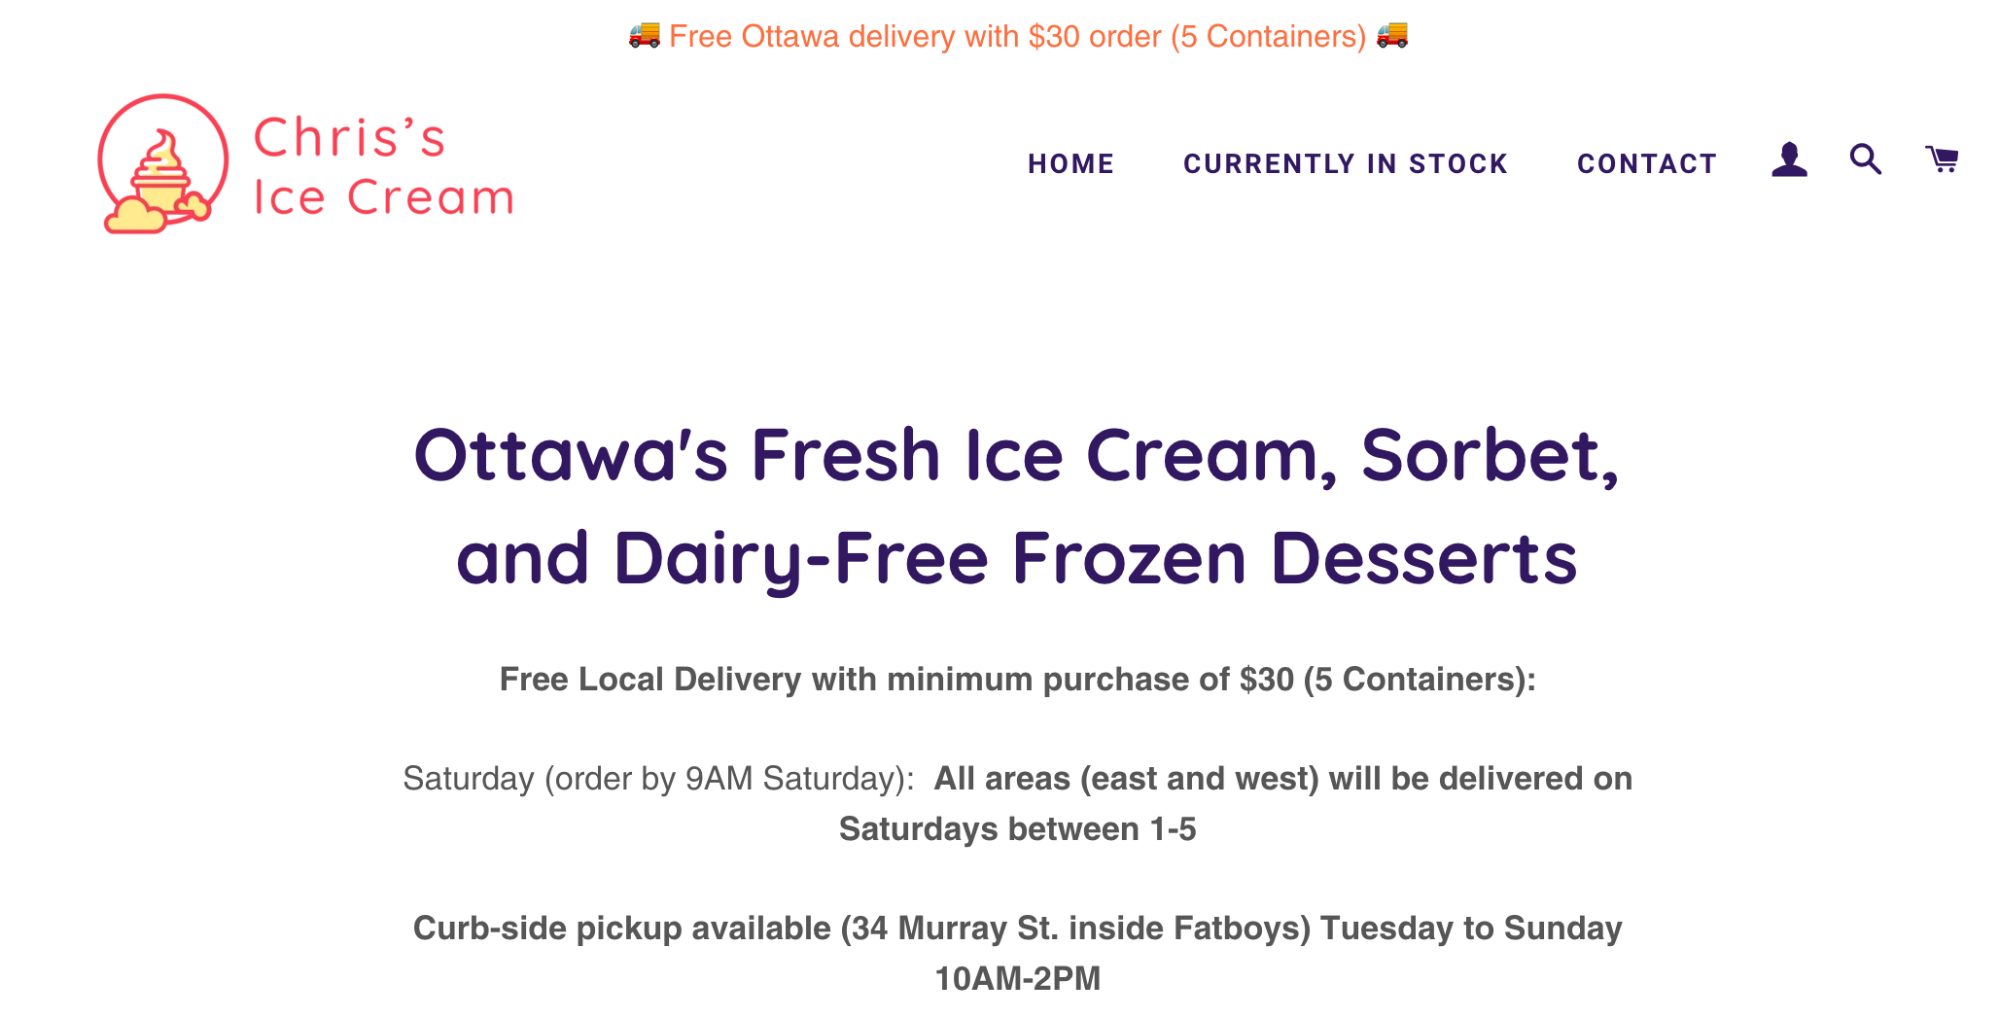 Chris's Ice Cream offer free local delivery with orders over $30 and note they deliver on Saturdays